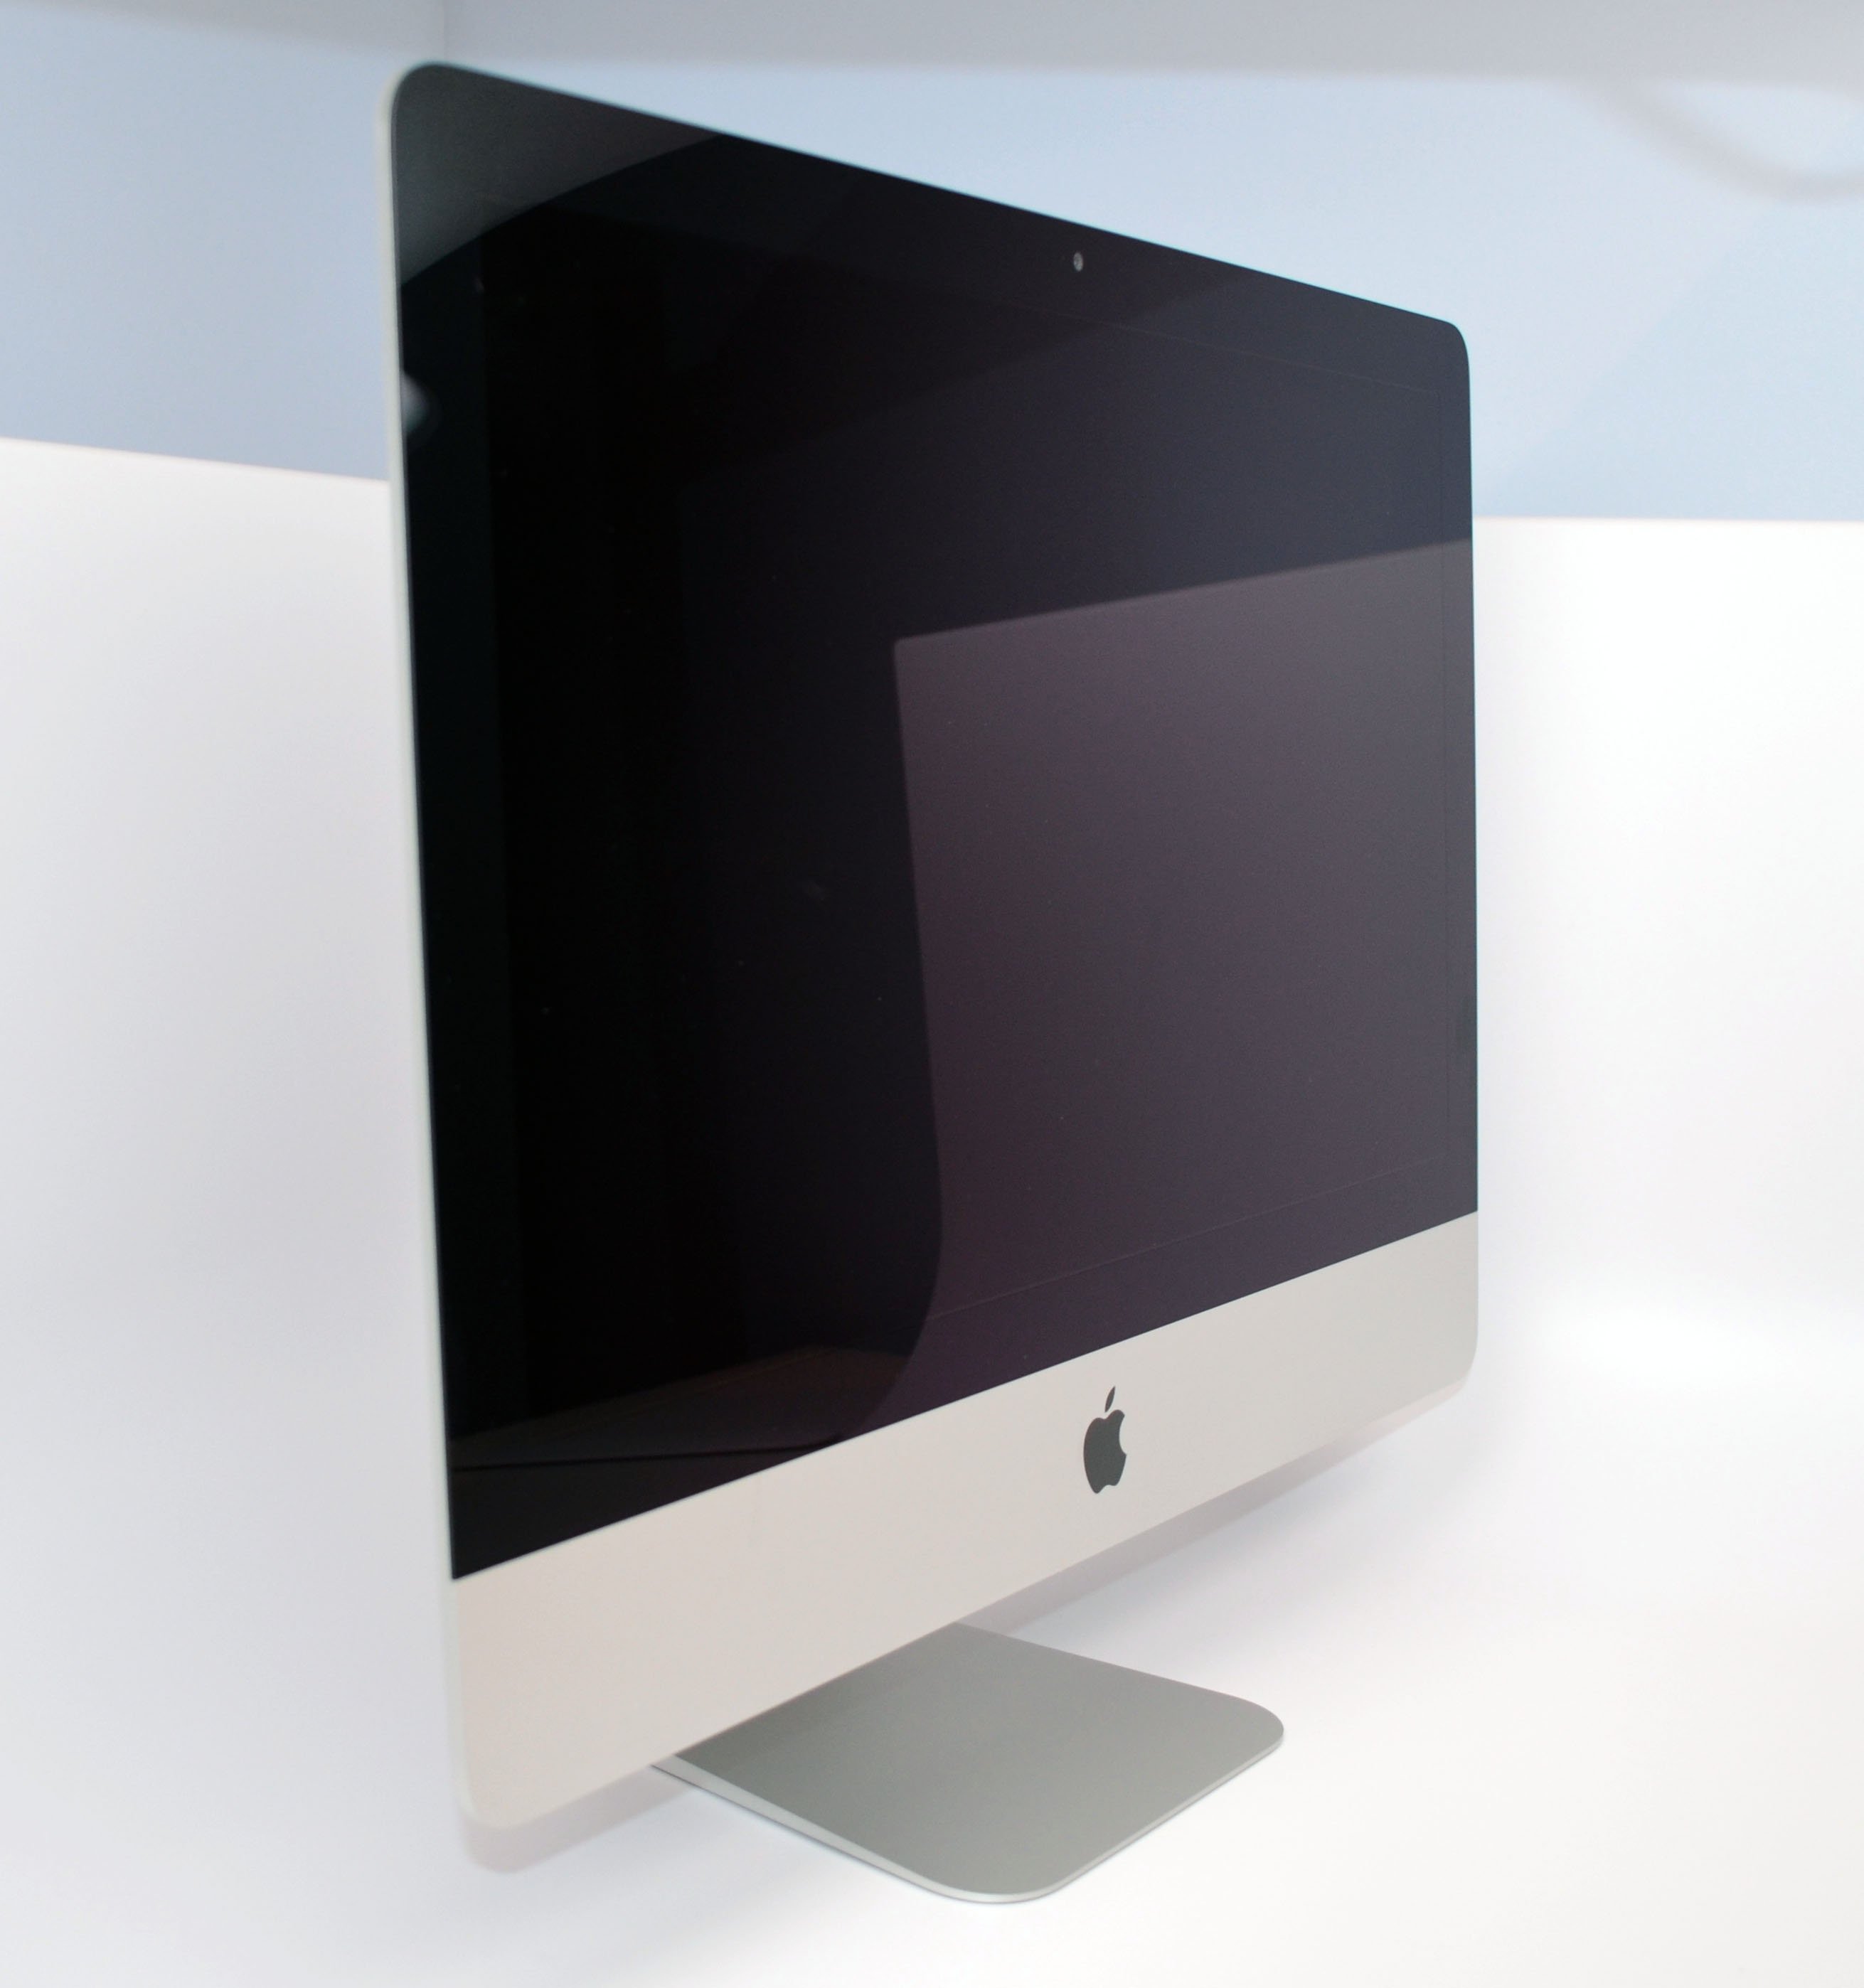 iMac Late 2012 Review - 22